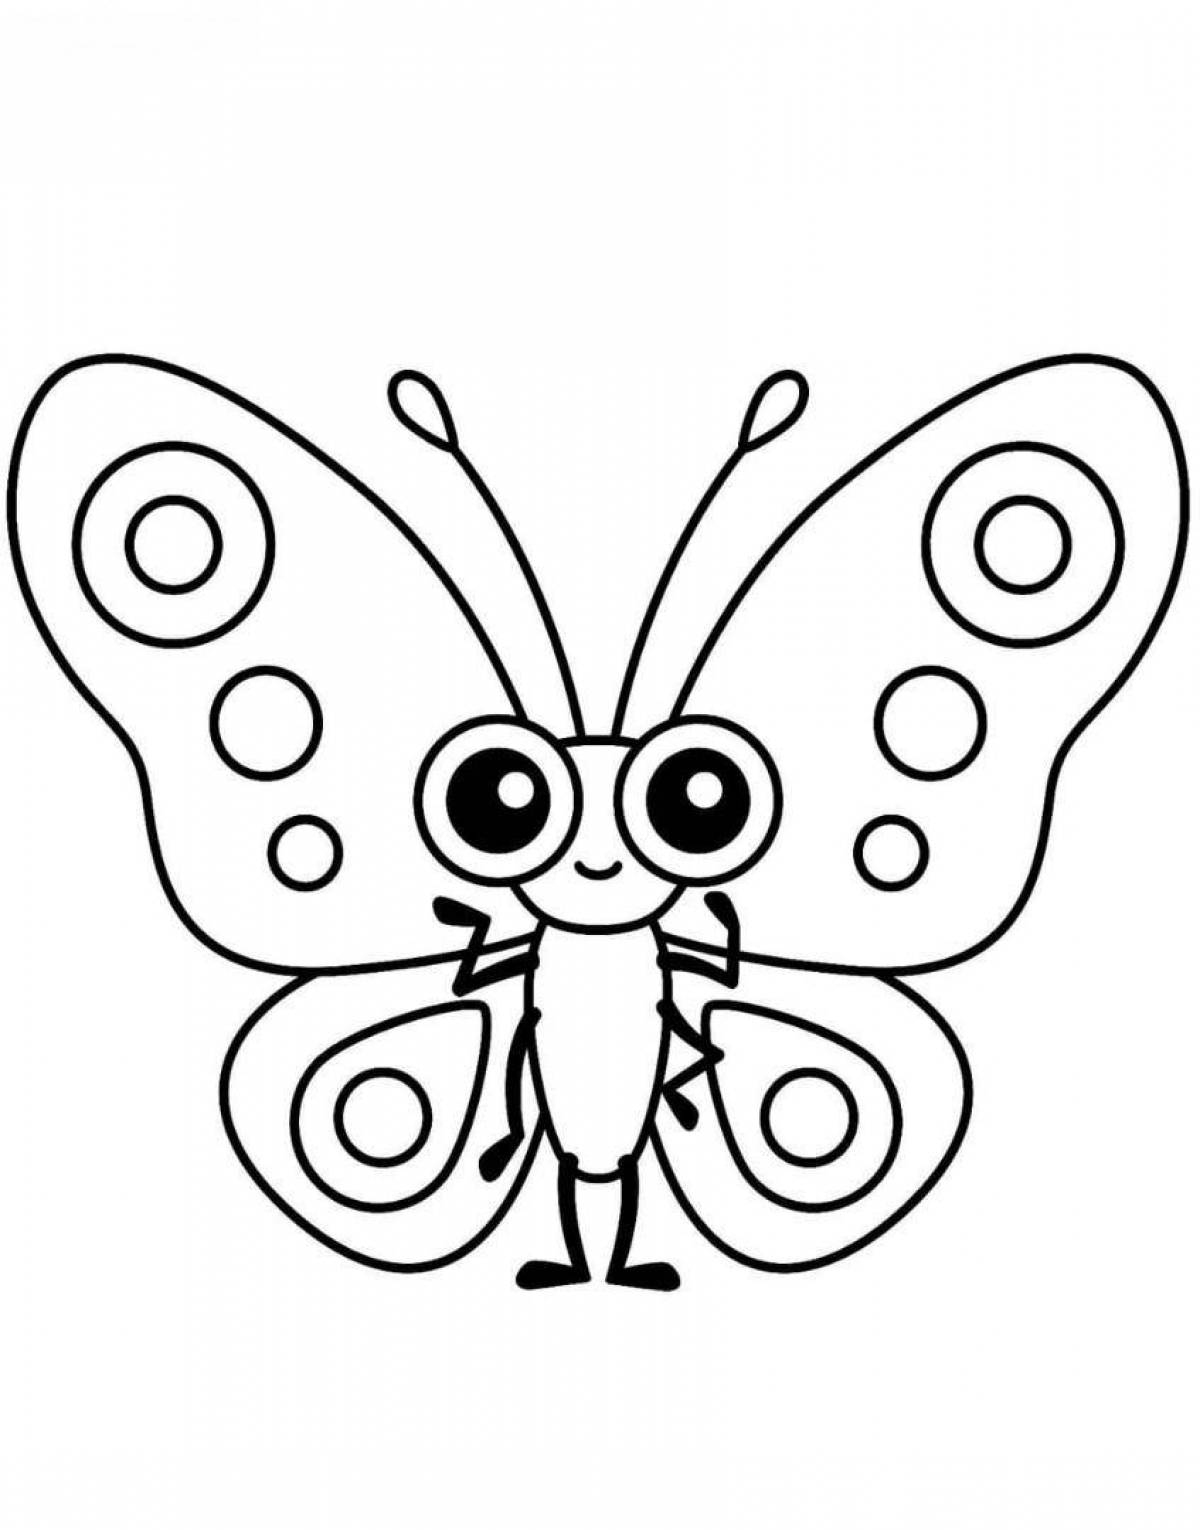 Brightly colored peacock butterfly coloring page